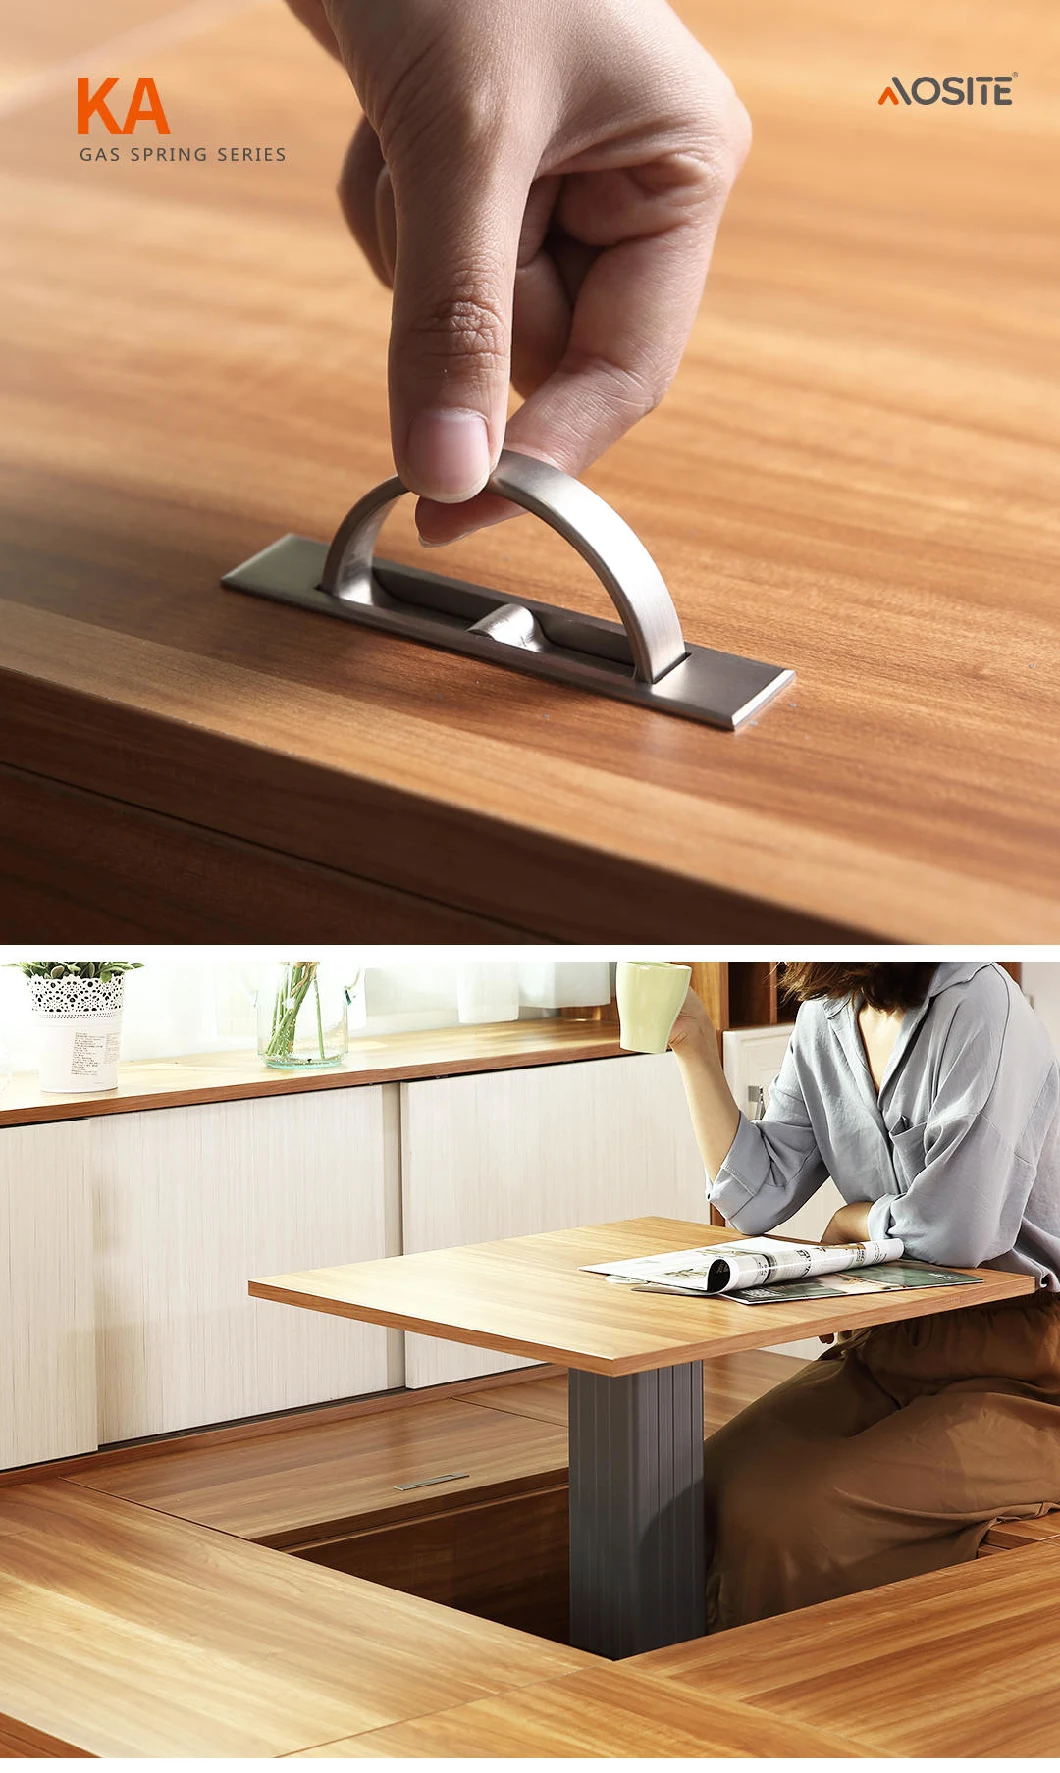 Furniture Cabinet fliping Concealed Knobs and Door Handles/Drawer knobs Embedded invisibility Hidden Tatami Handle